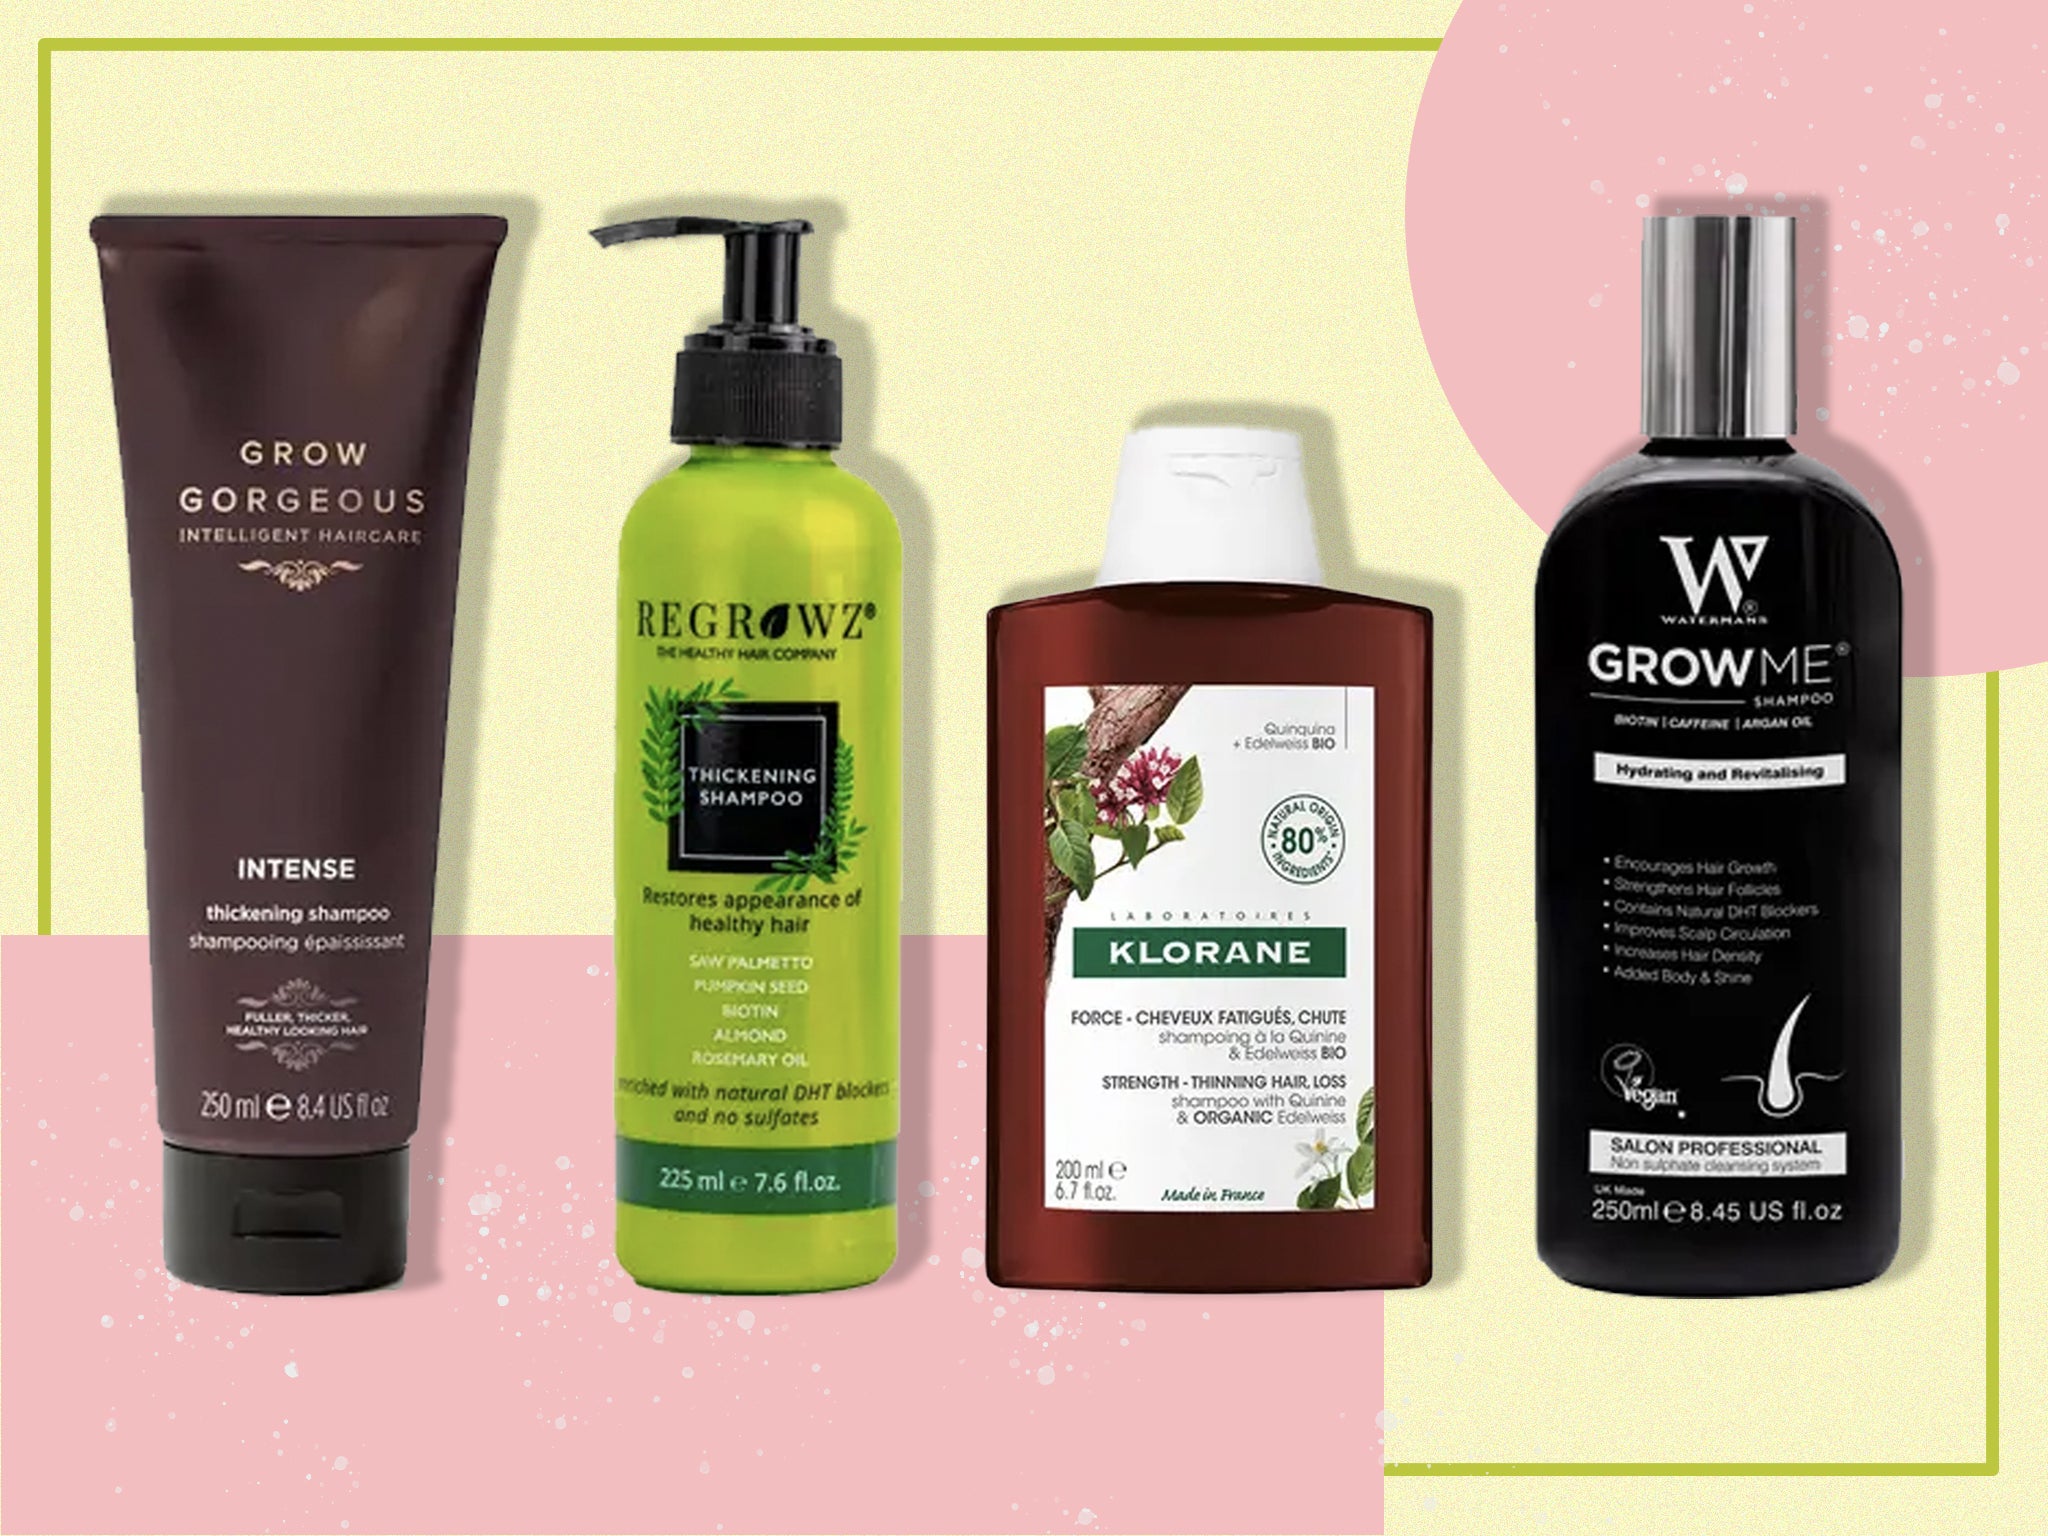 The 15 Best Shampoos for Curly Hair of 2023